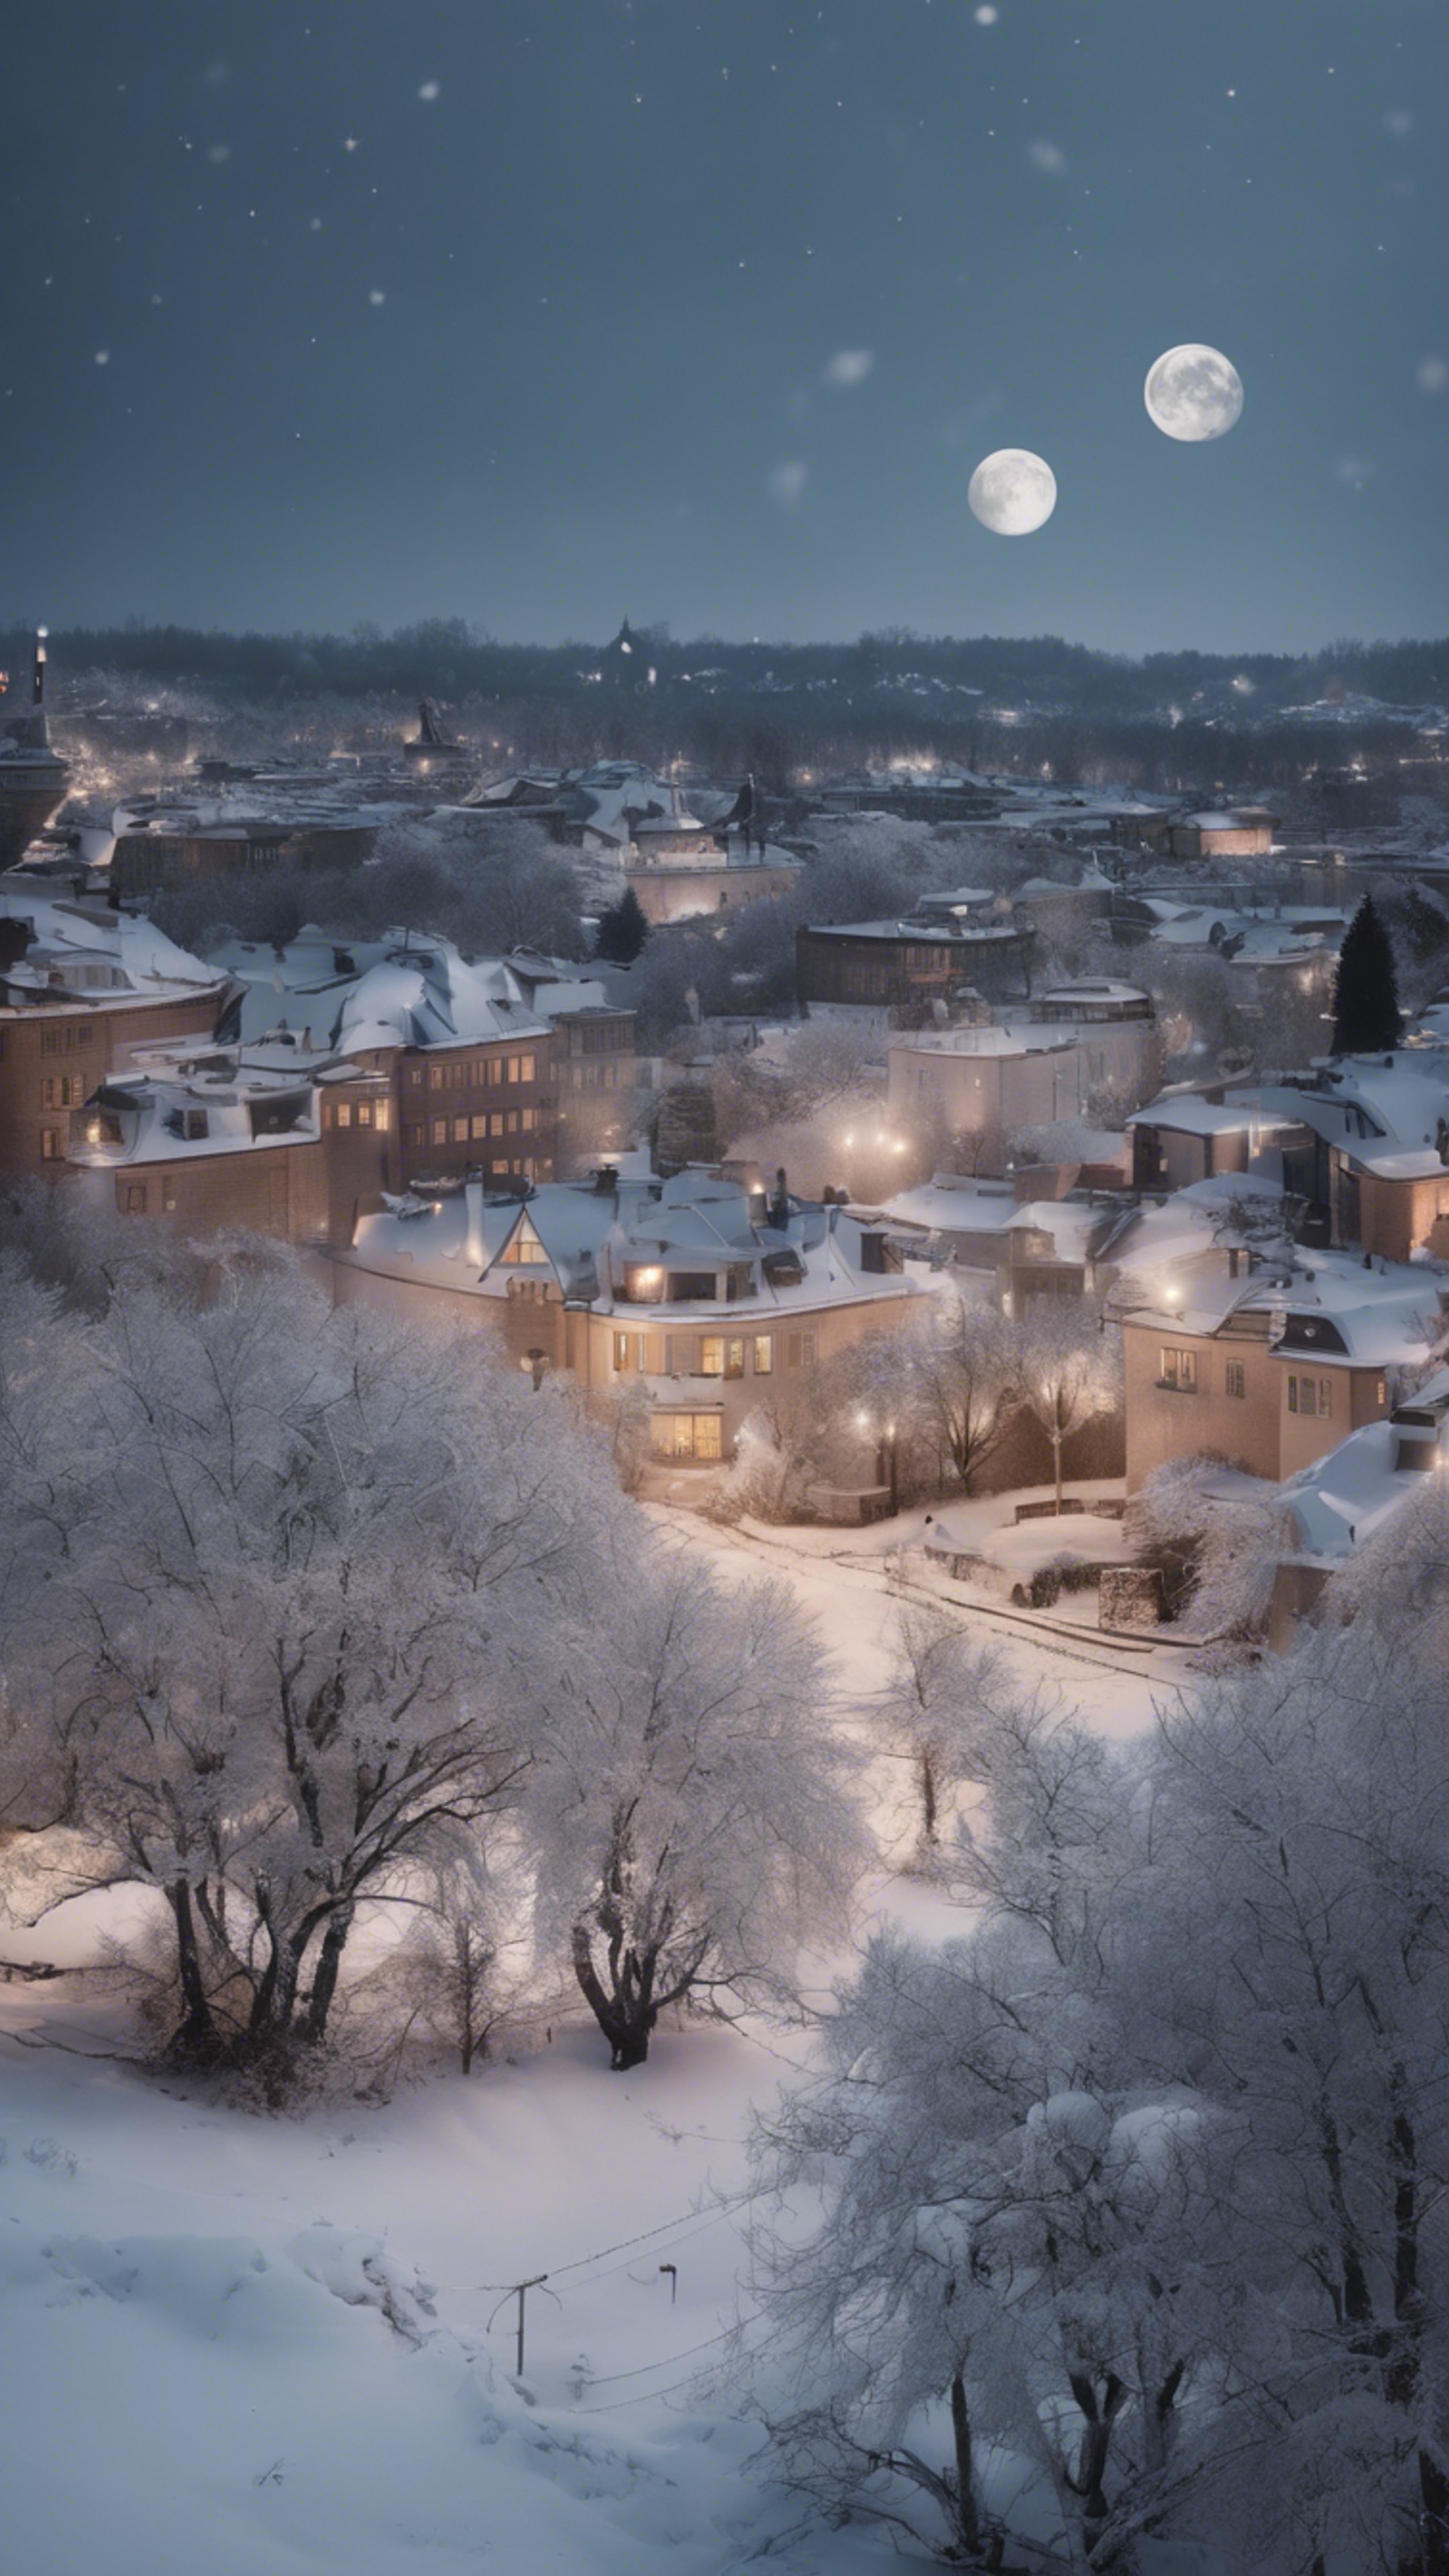 A snowy winter scene, the rooftops and trees covered by cool white snow, the moon casts a silvery glow on the serene town. Tapet[b59119720f8642b39e1c]